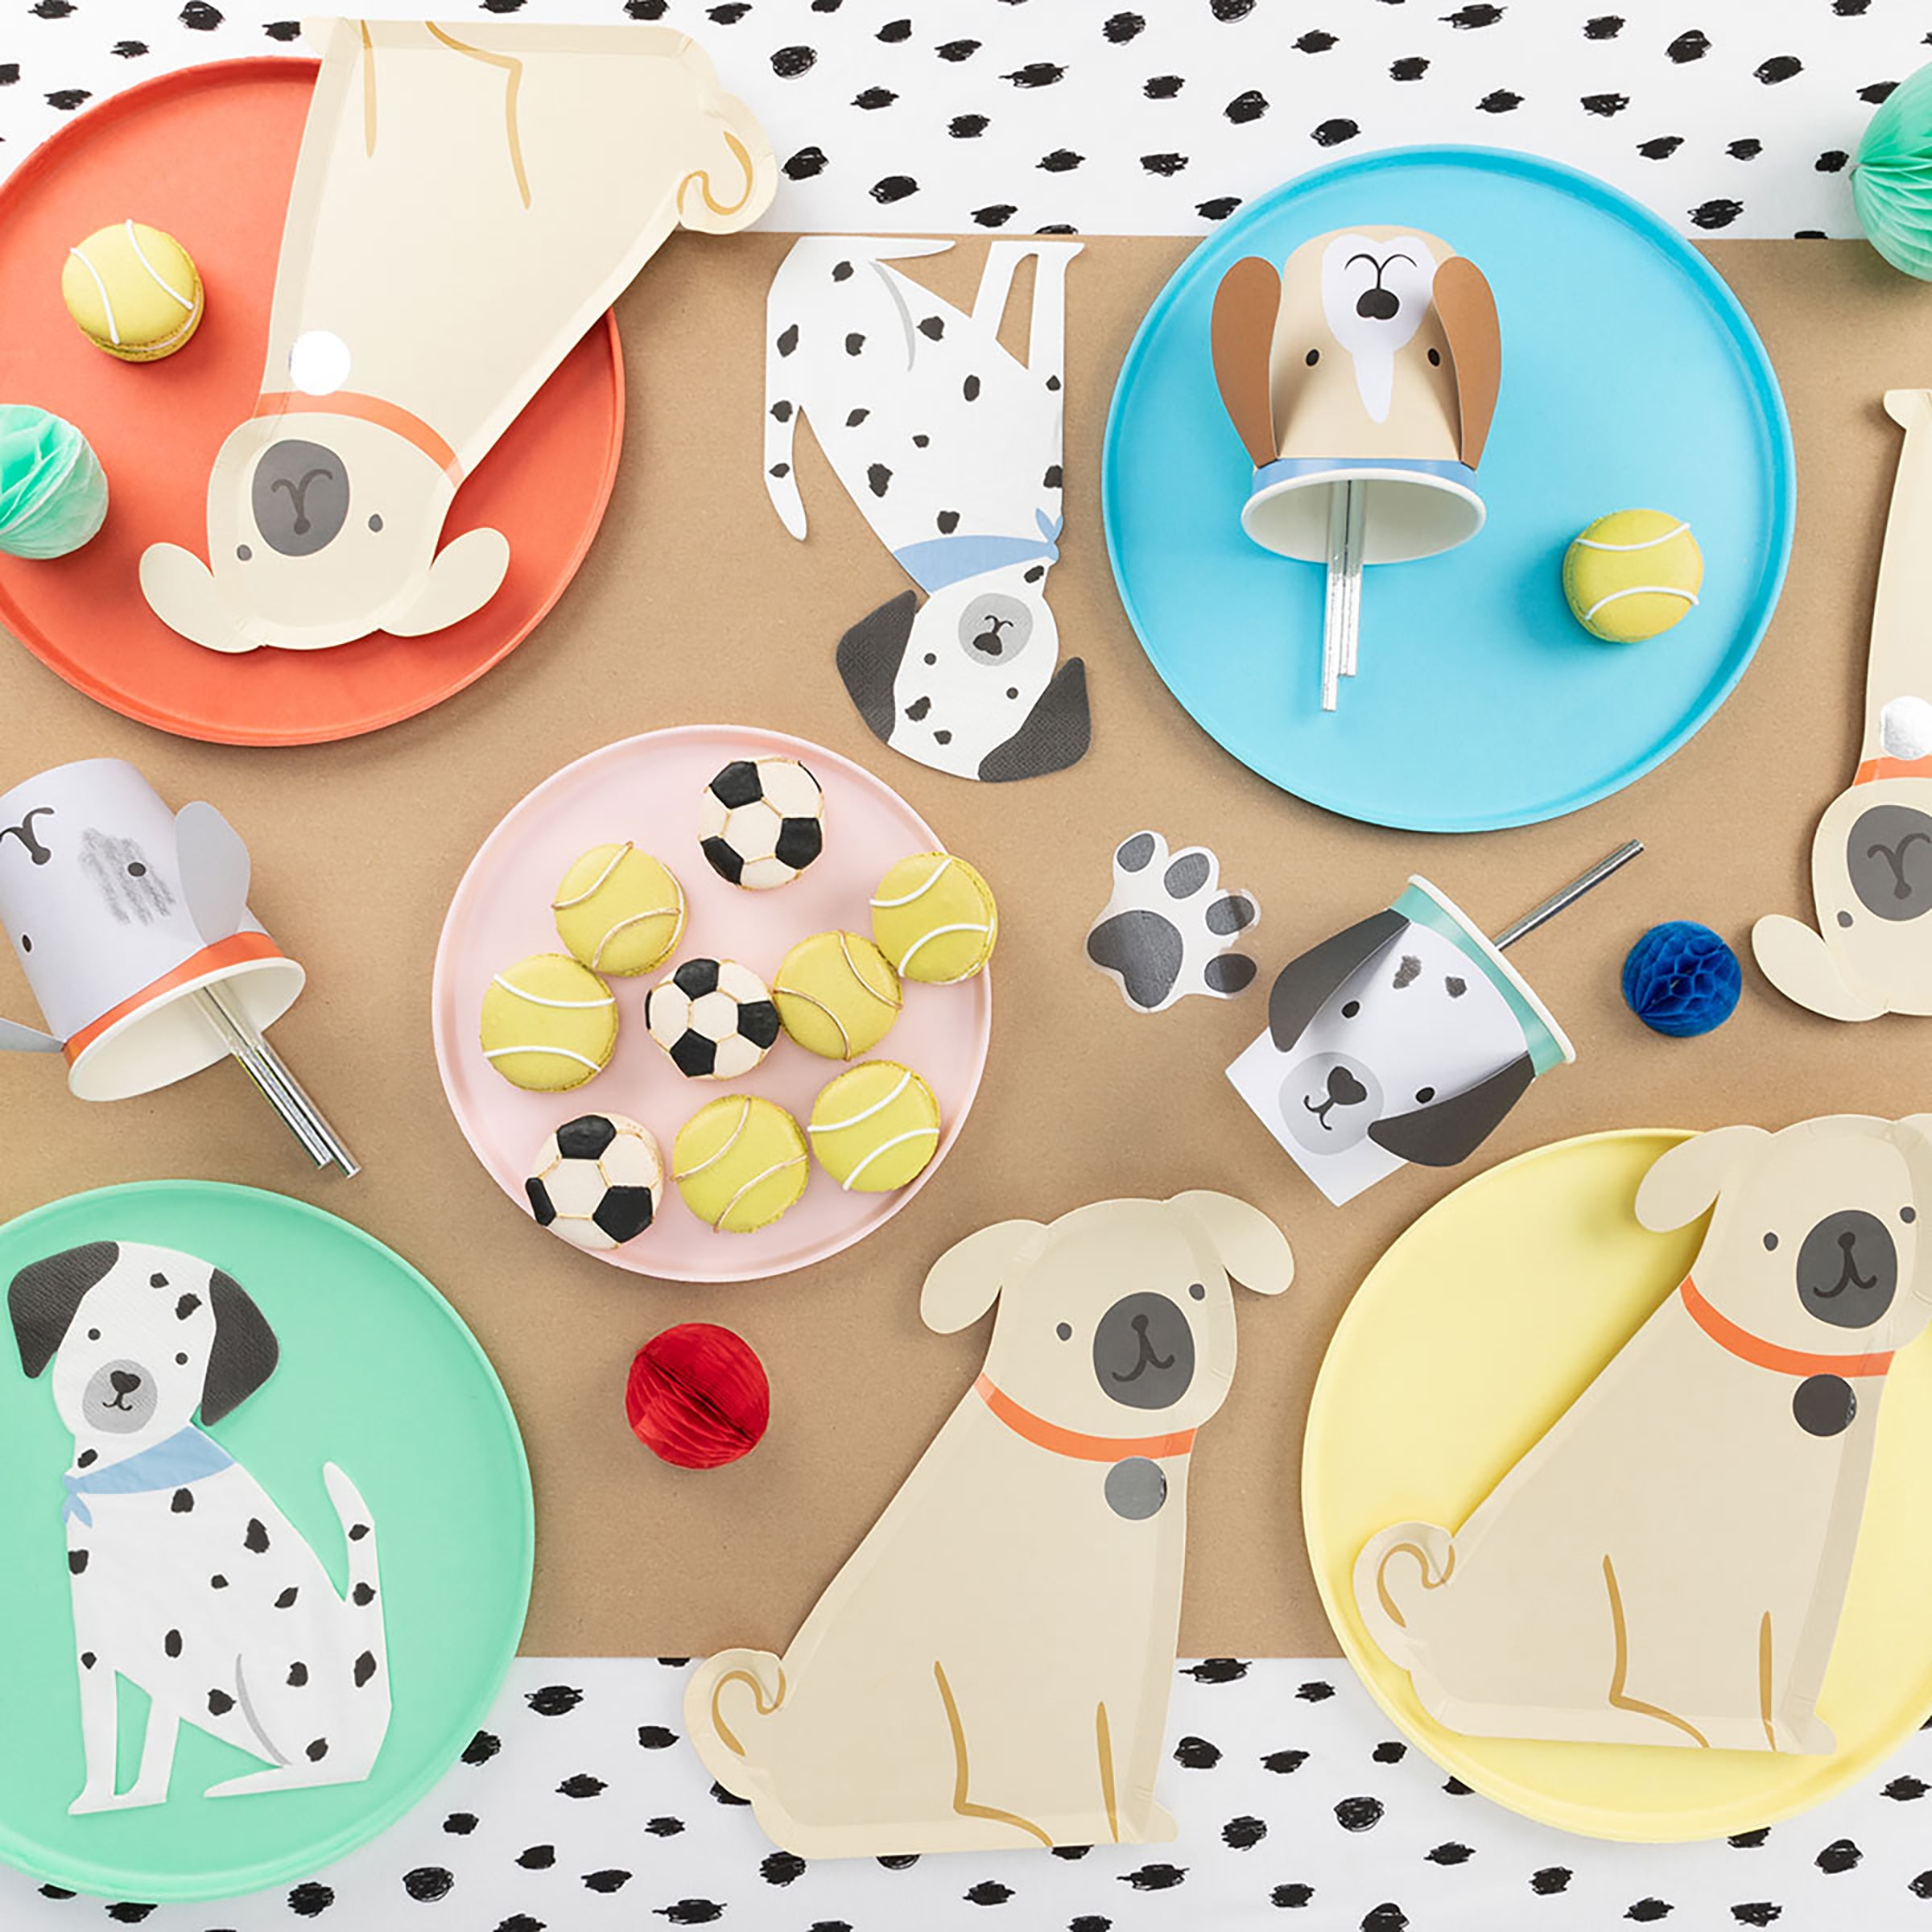 Our paper plates, in the shape of a pug, are perfect for a dog themed birthday party or dog birthday party.